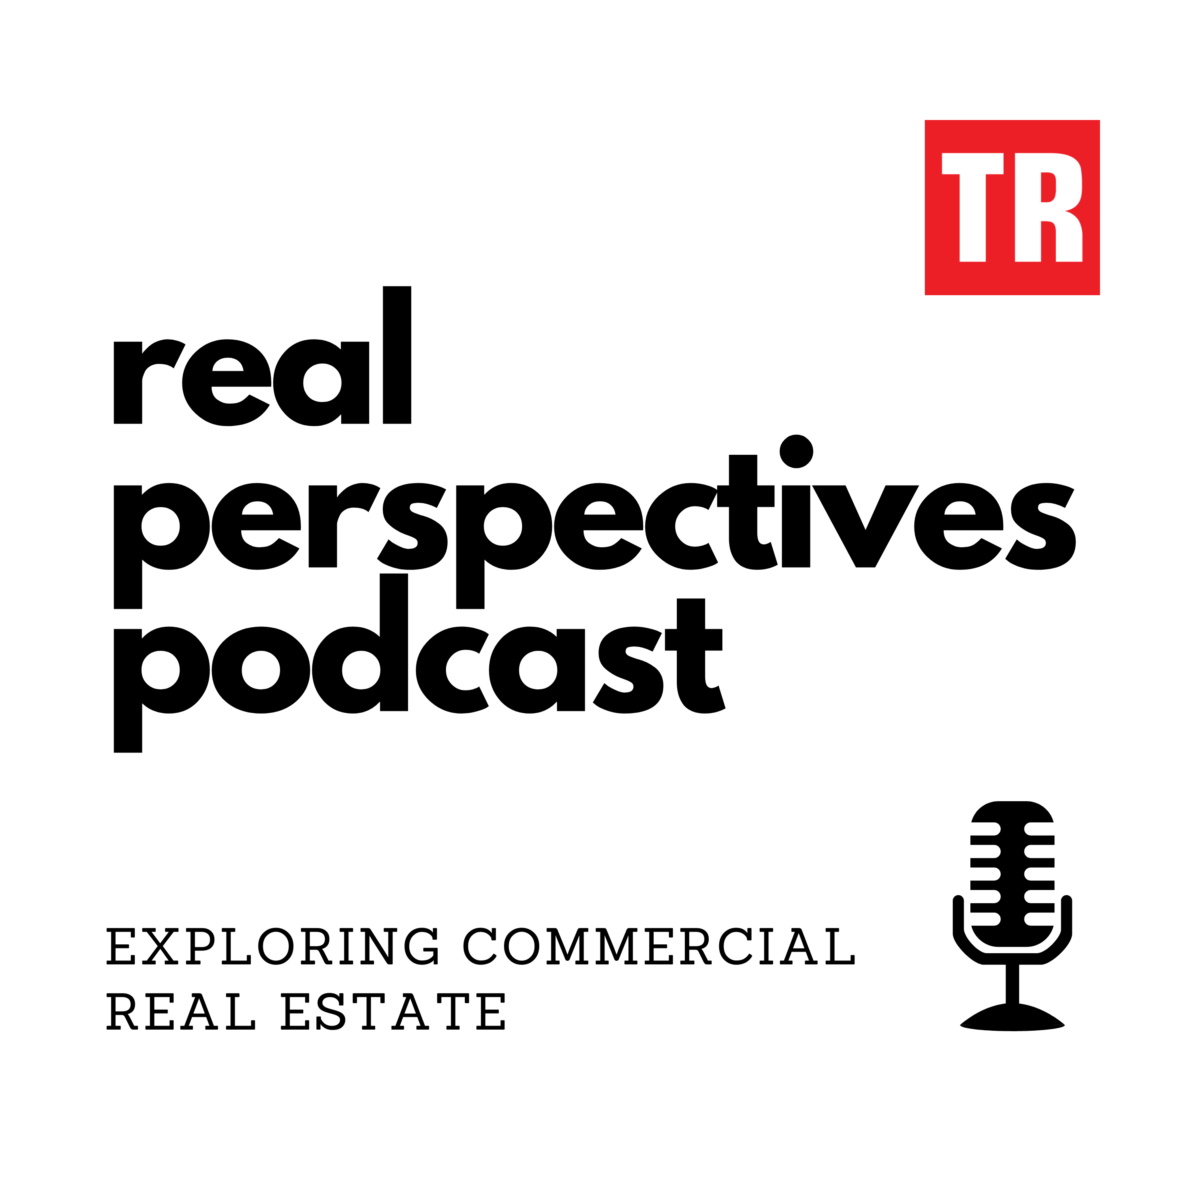 Banner for The Registry Real Perspectives Podcast, exploring commercial real estate